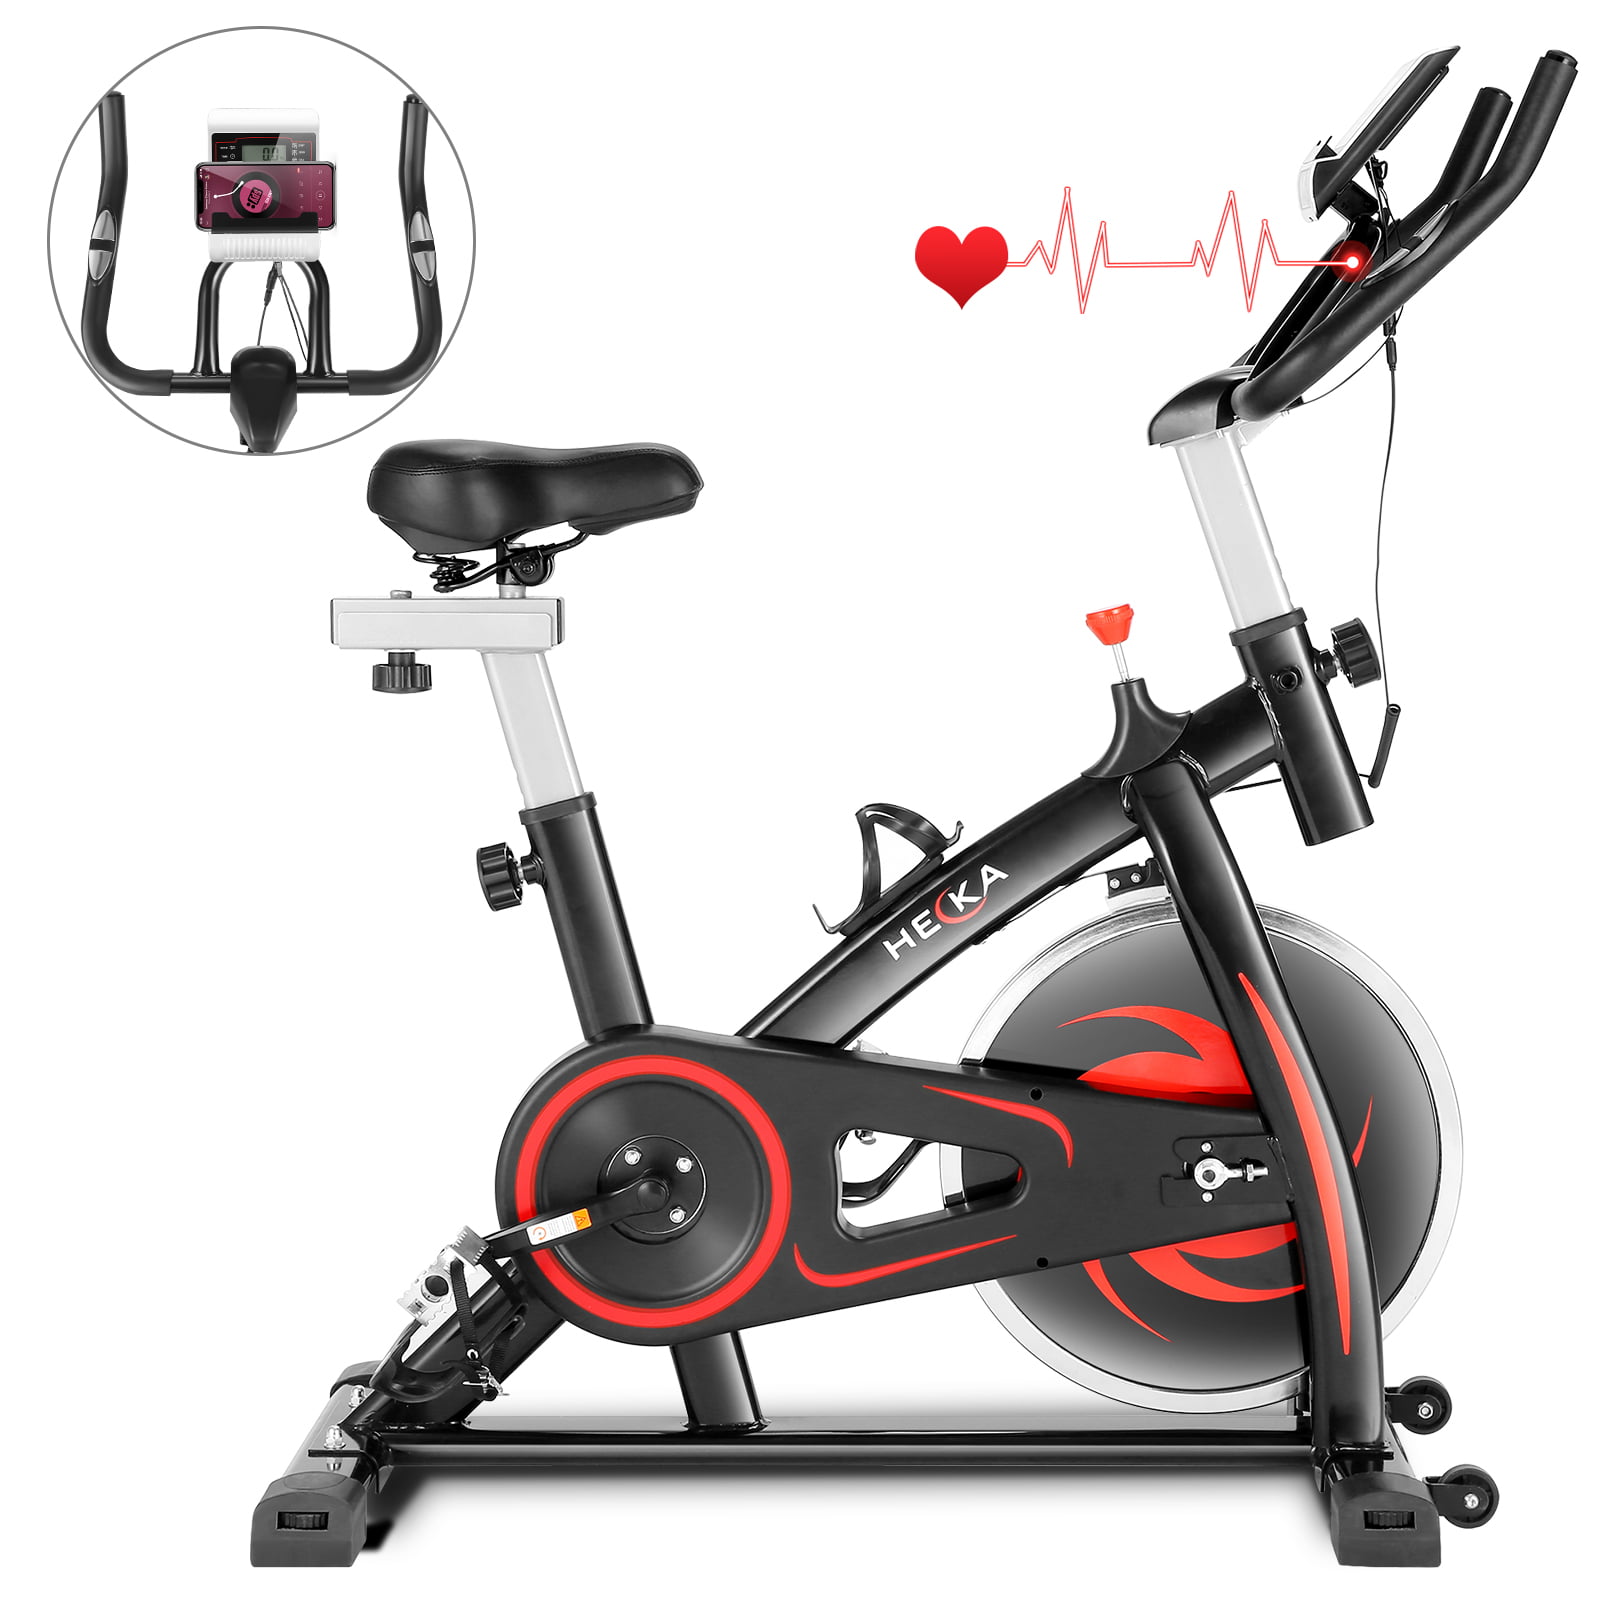 Details about   HEKA Exercise Bike Bicycle Cycling Fitness Stationary Home Workout Indoor e 67 